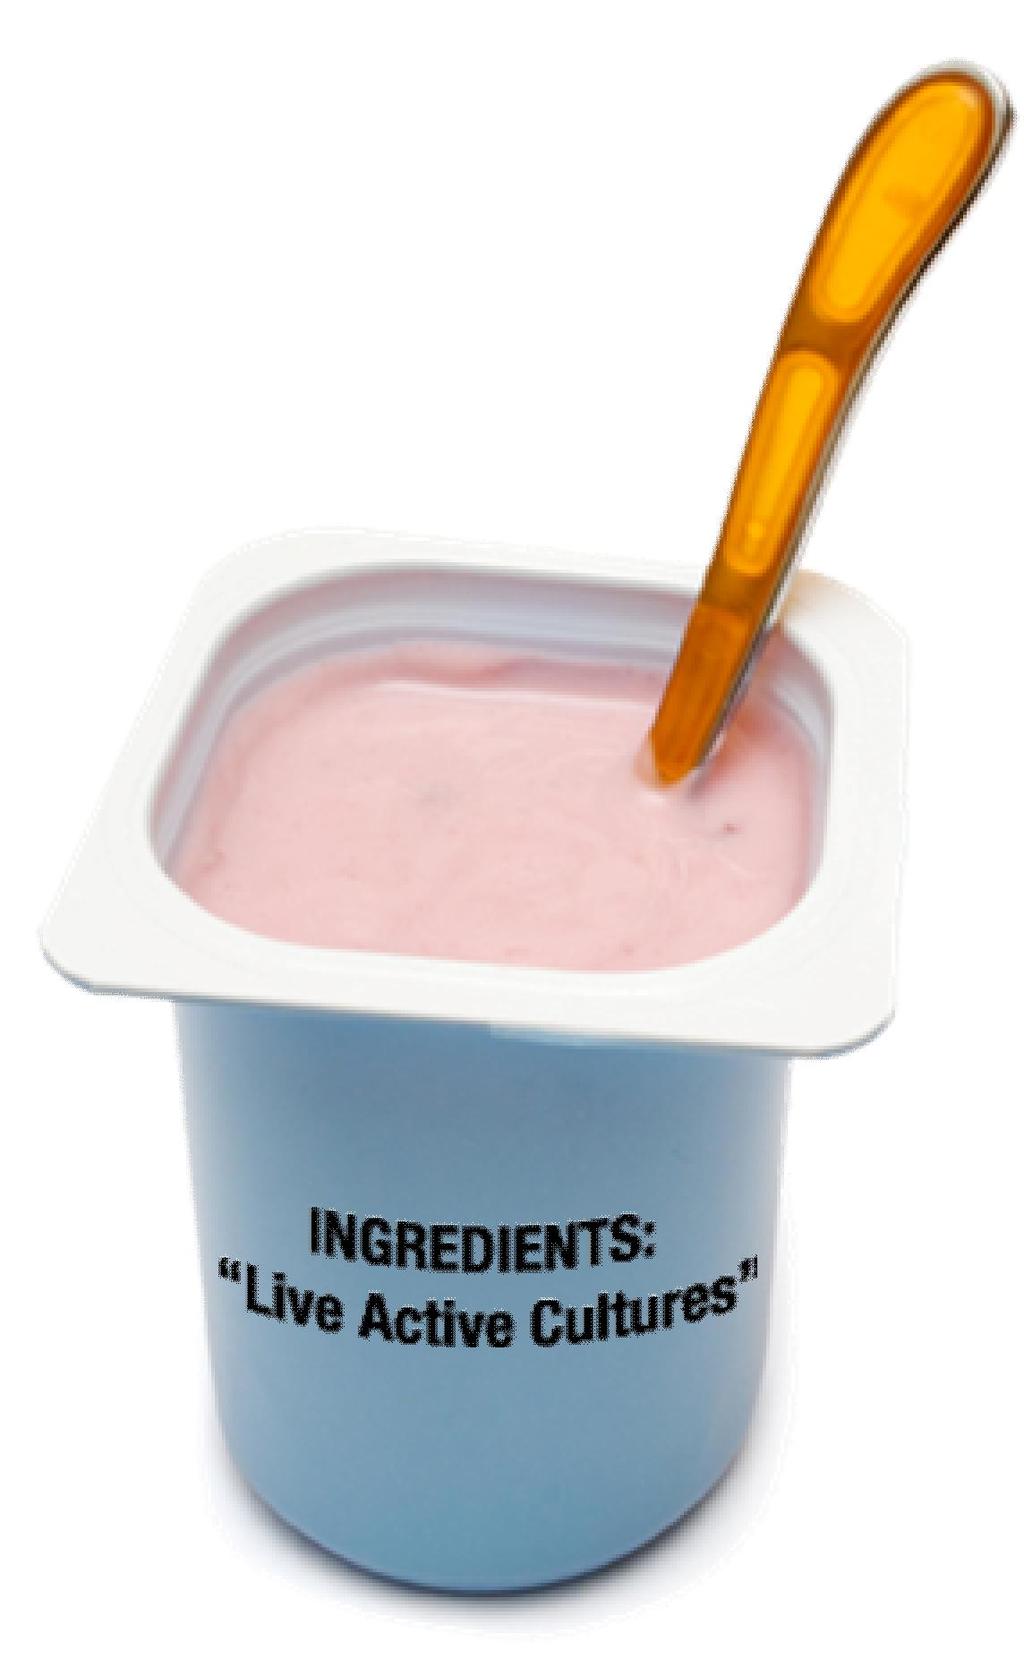 Cultured Dairy Products Excellent source of calcium Contain probiotics bacteria that promote healthy